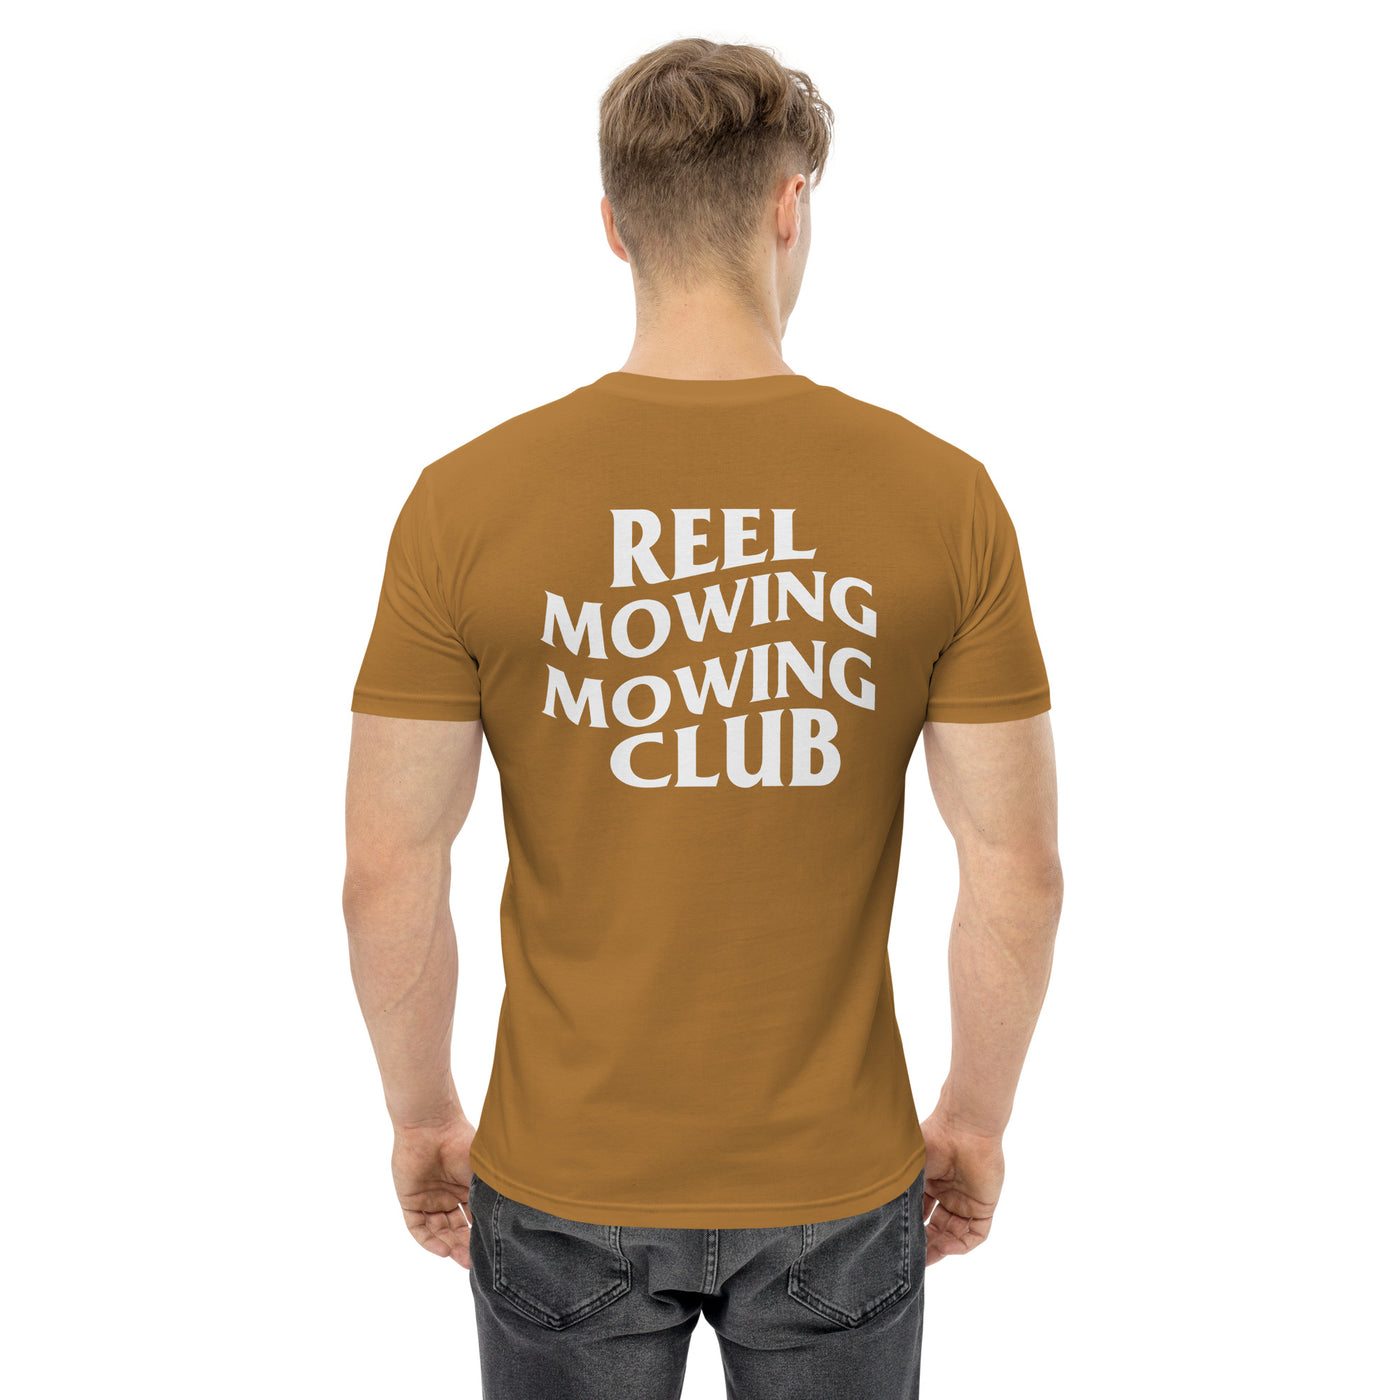 REEL MOWING MOWING CLUB SHIRT – Height Of Clothing Apparel